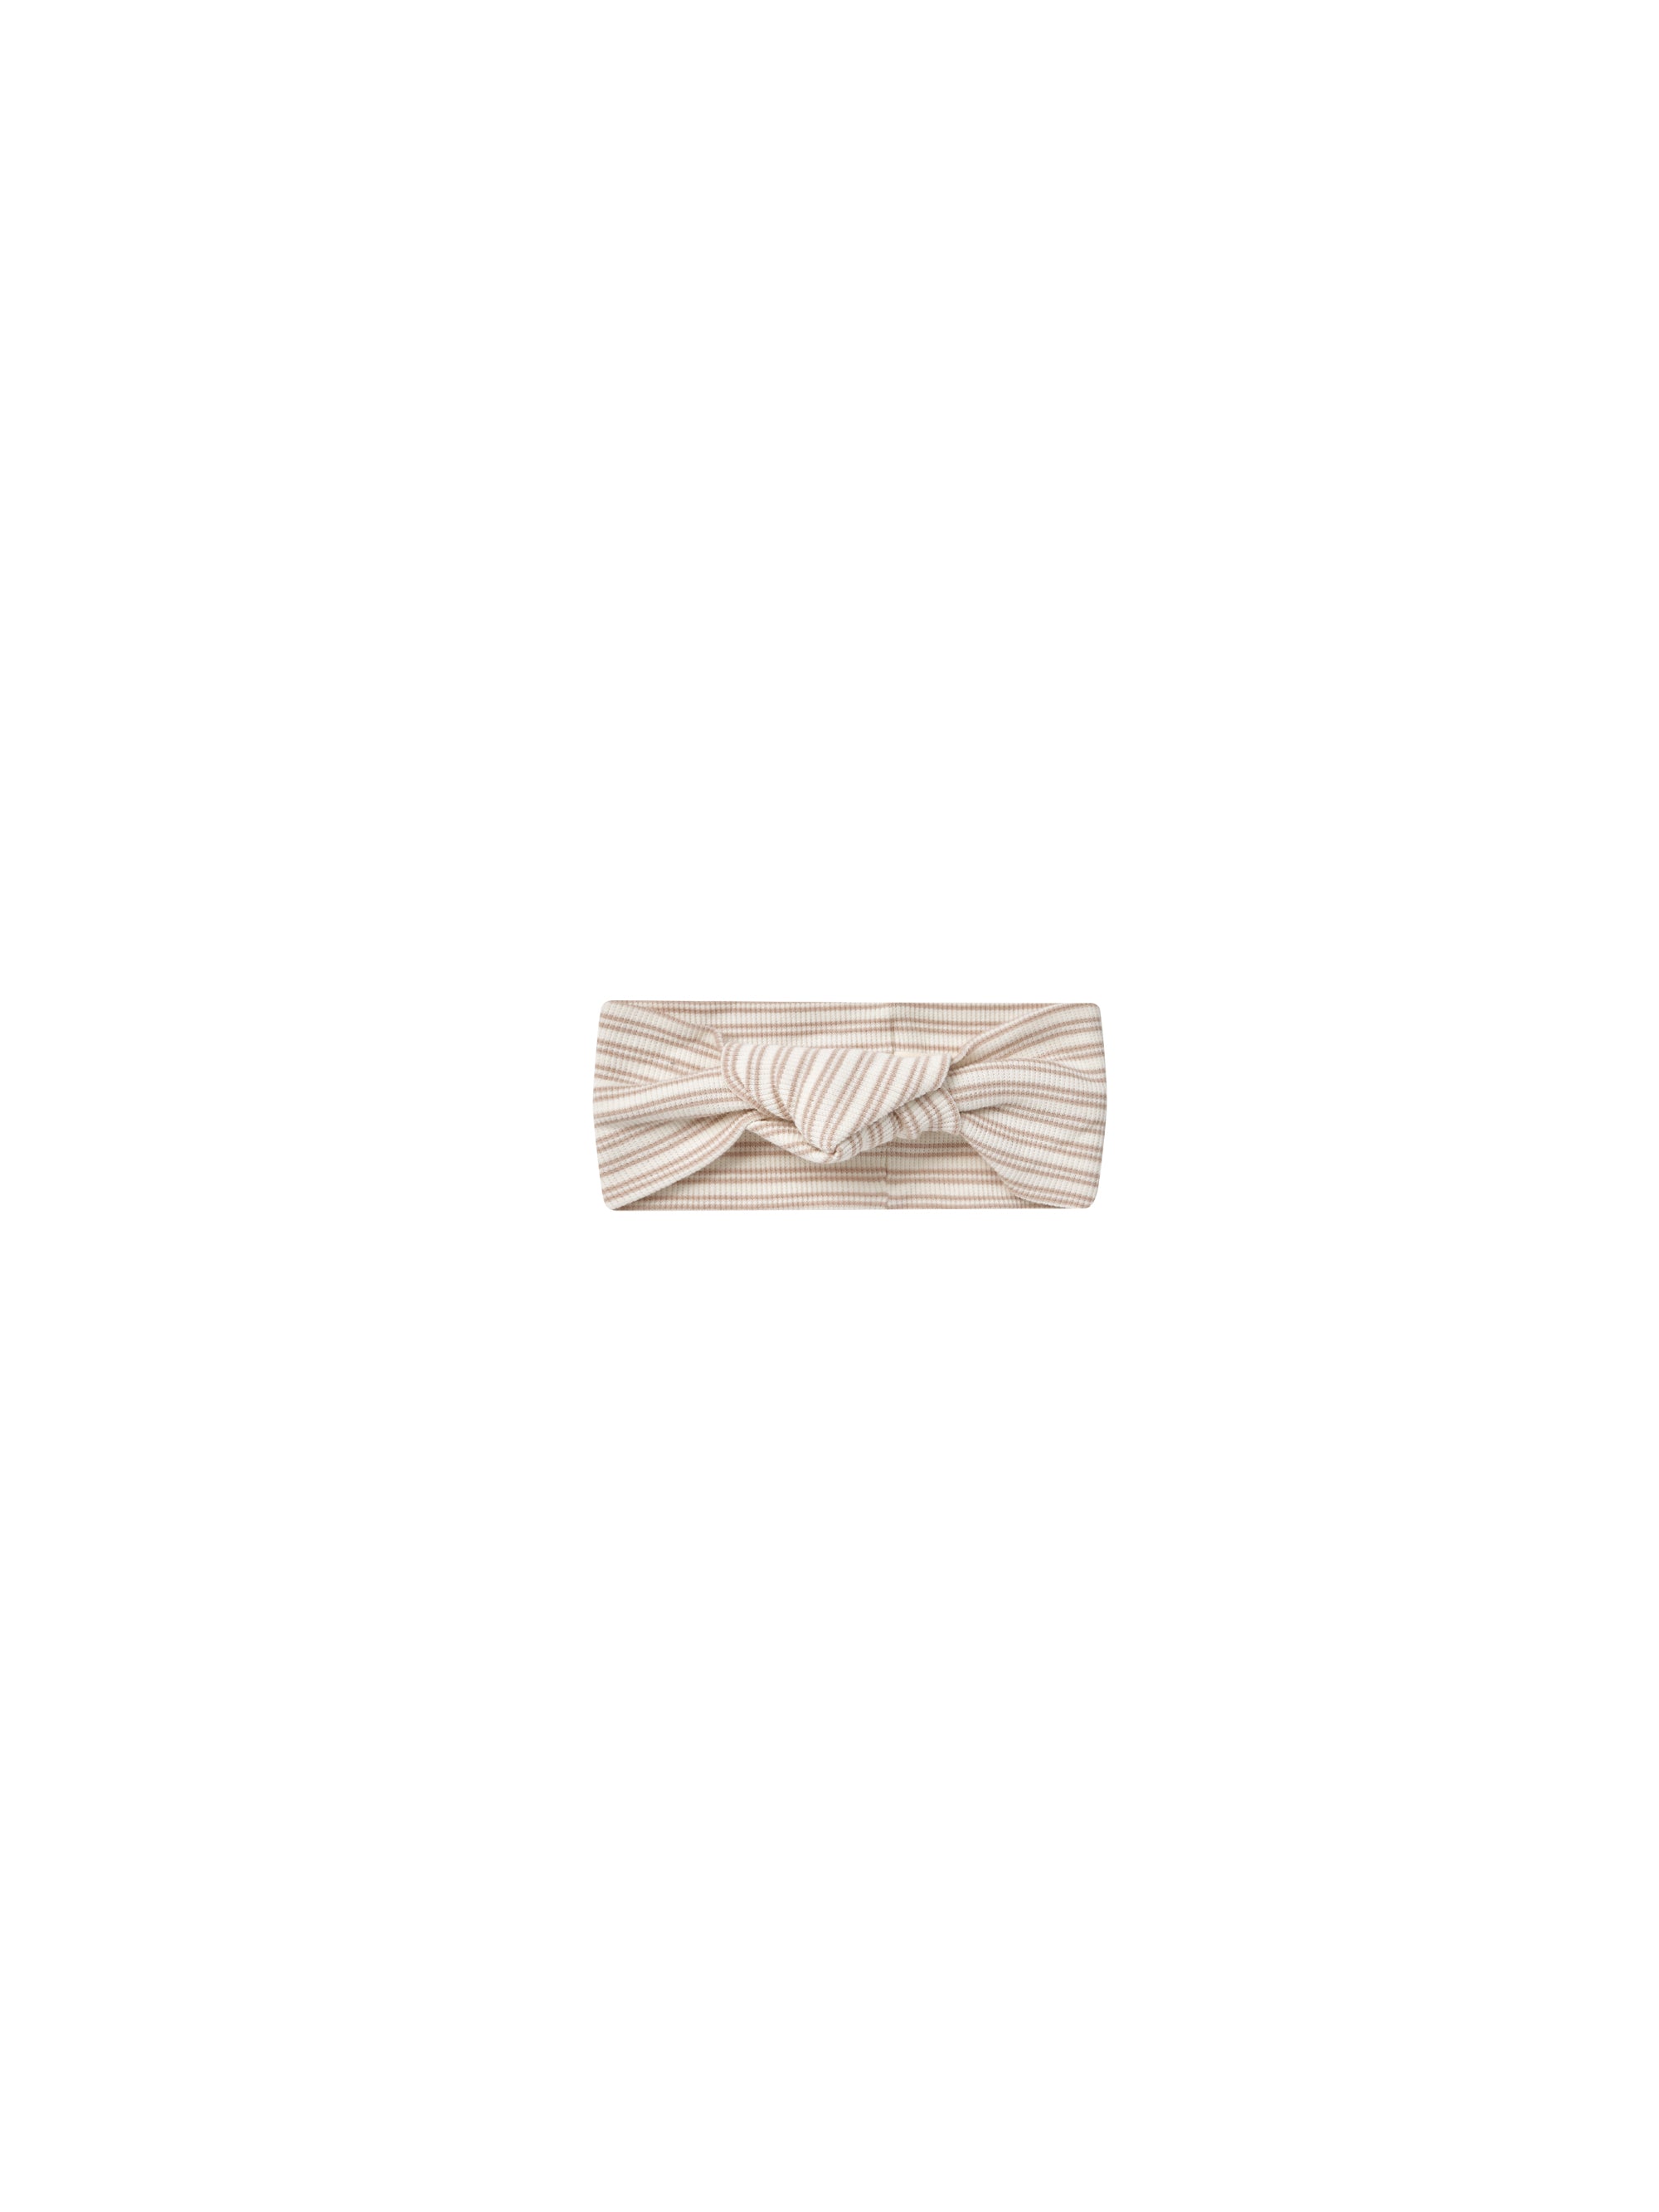 Quincy Mae Ribbed Knotted Headband